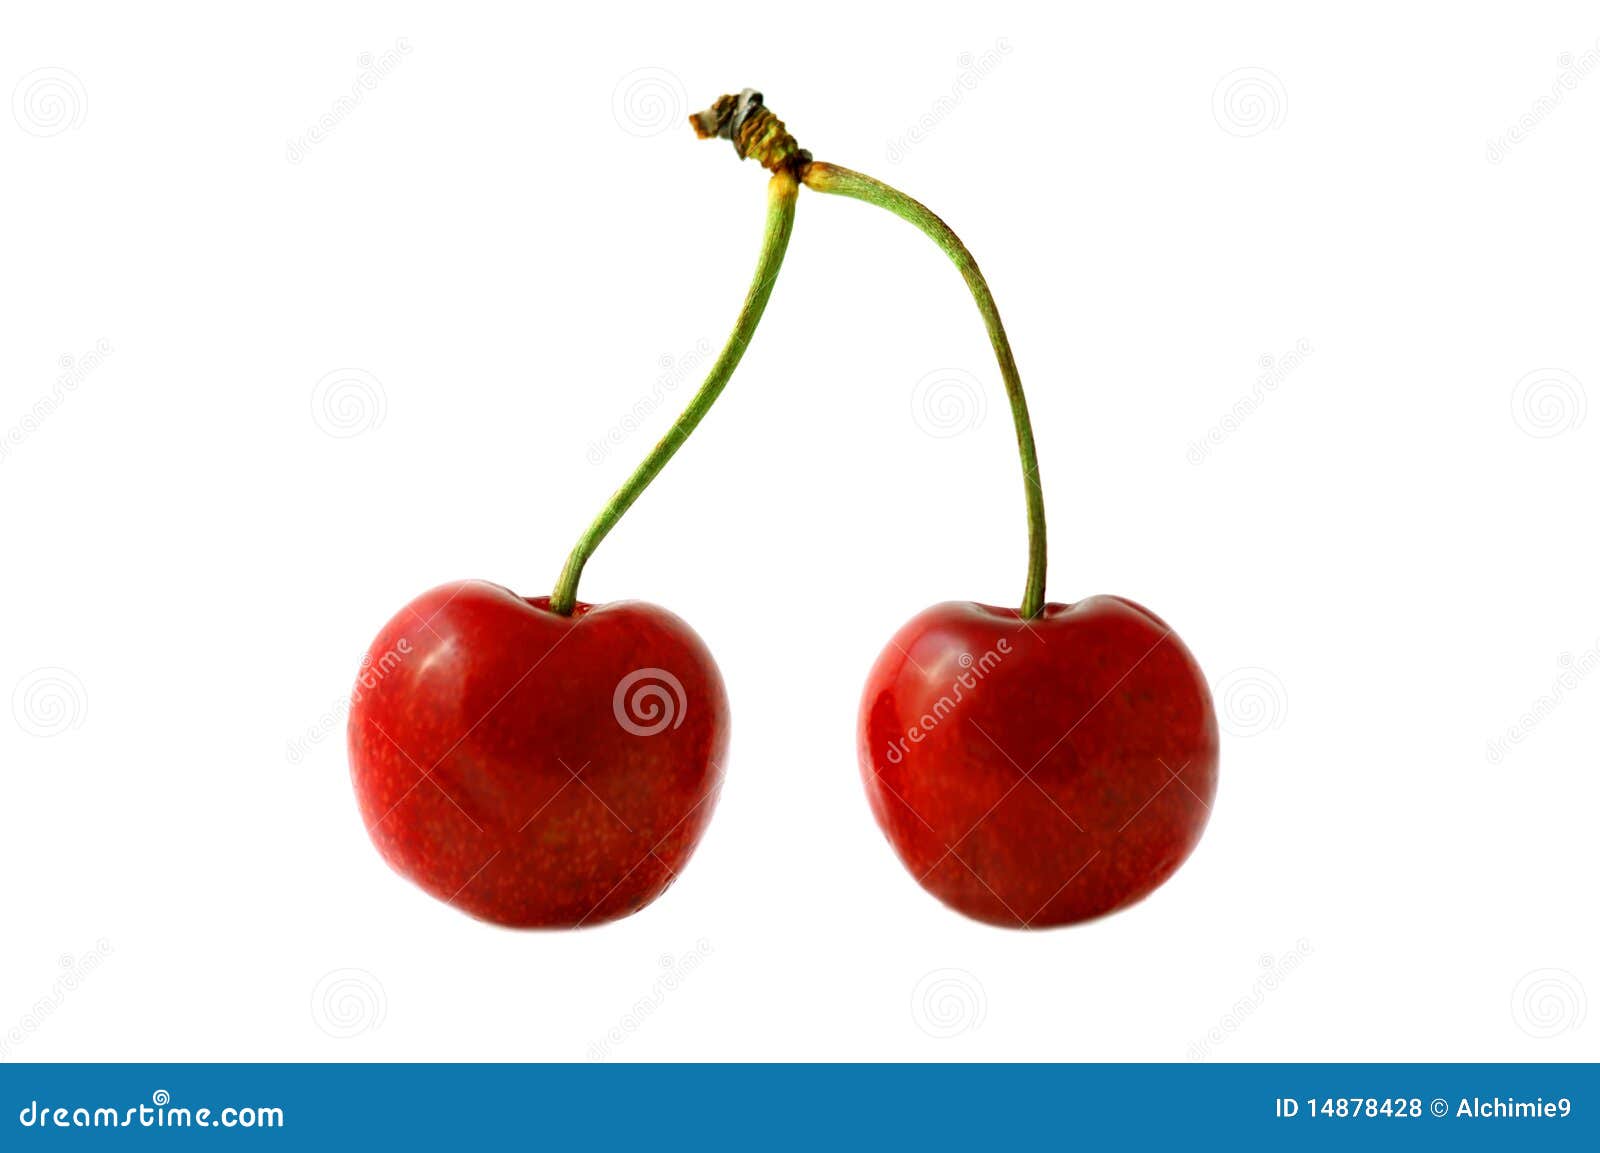 Cherry; Objects On White Background Royalty Free Stock Photos - Image ...